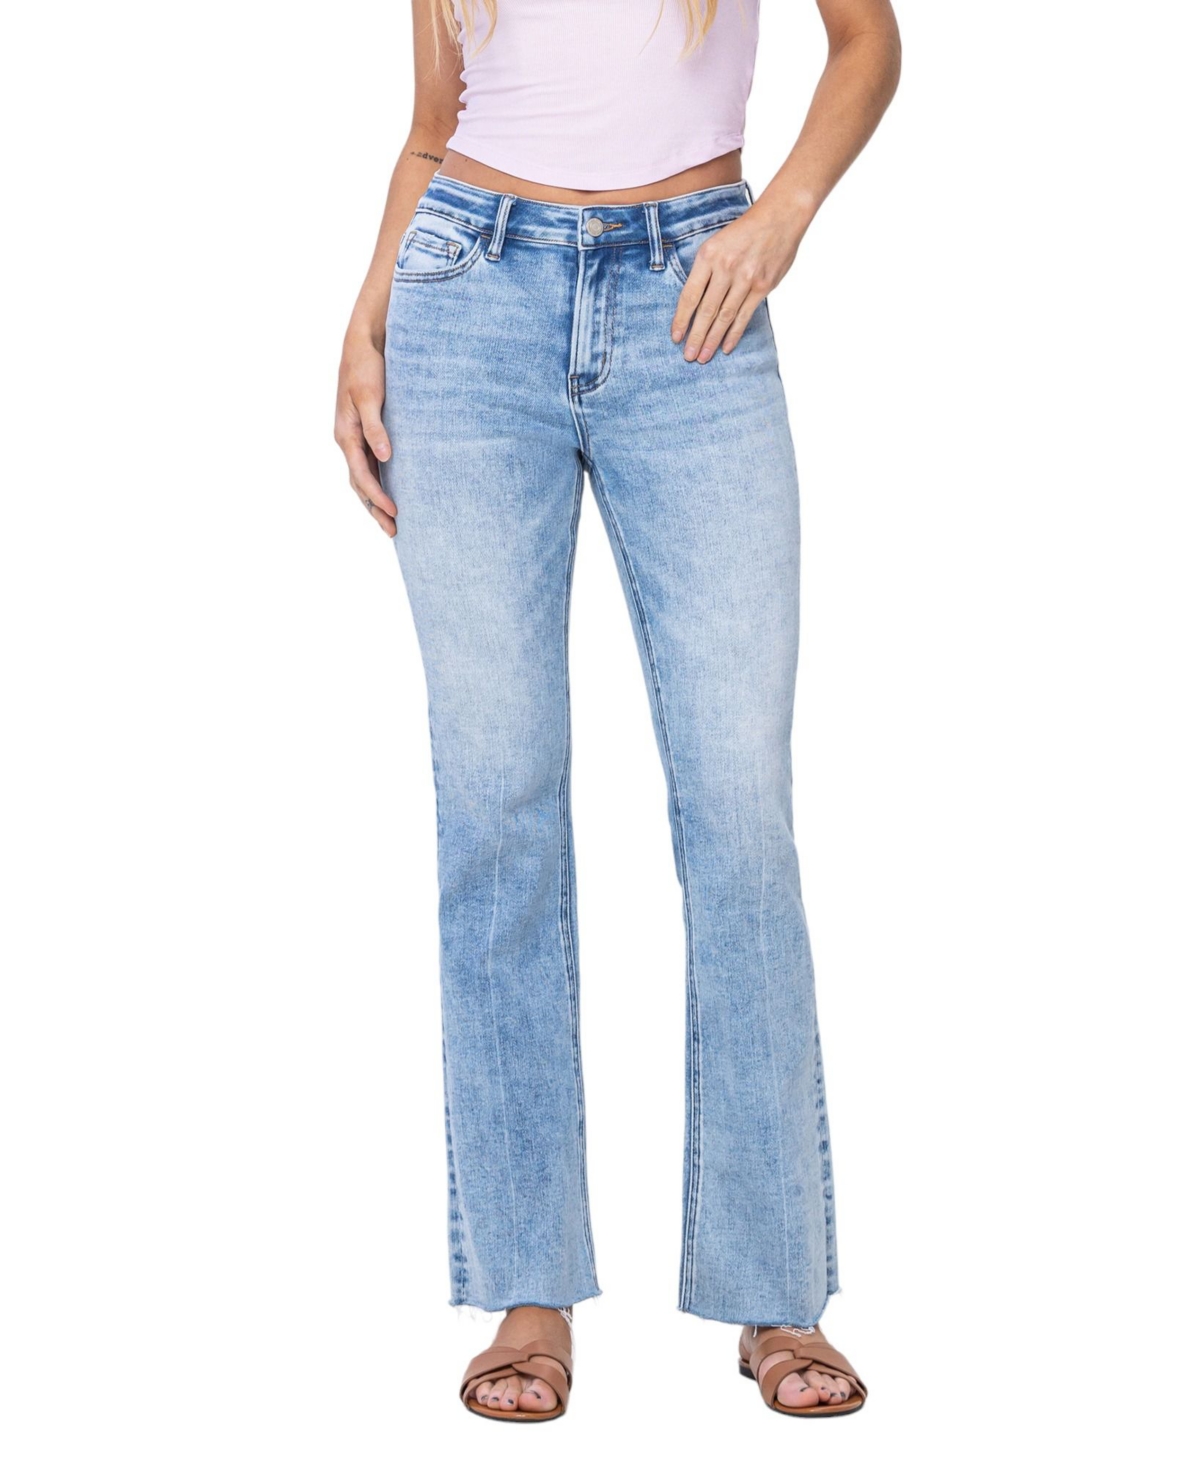 Women's High Rise Bootcut Jeans - Exceedingly blue